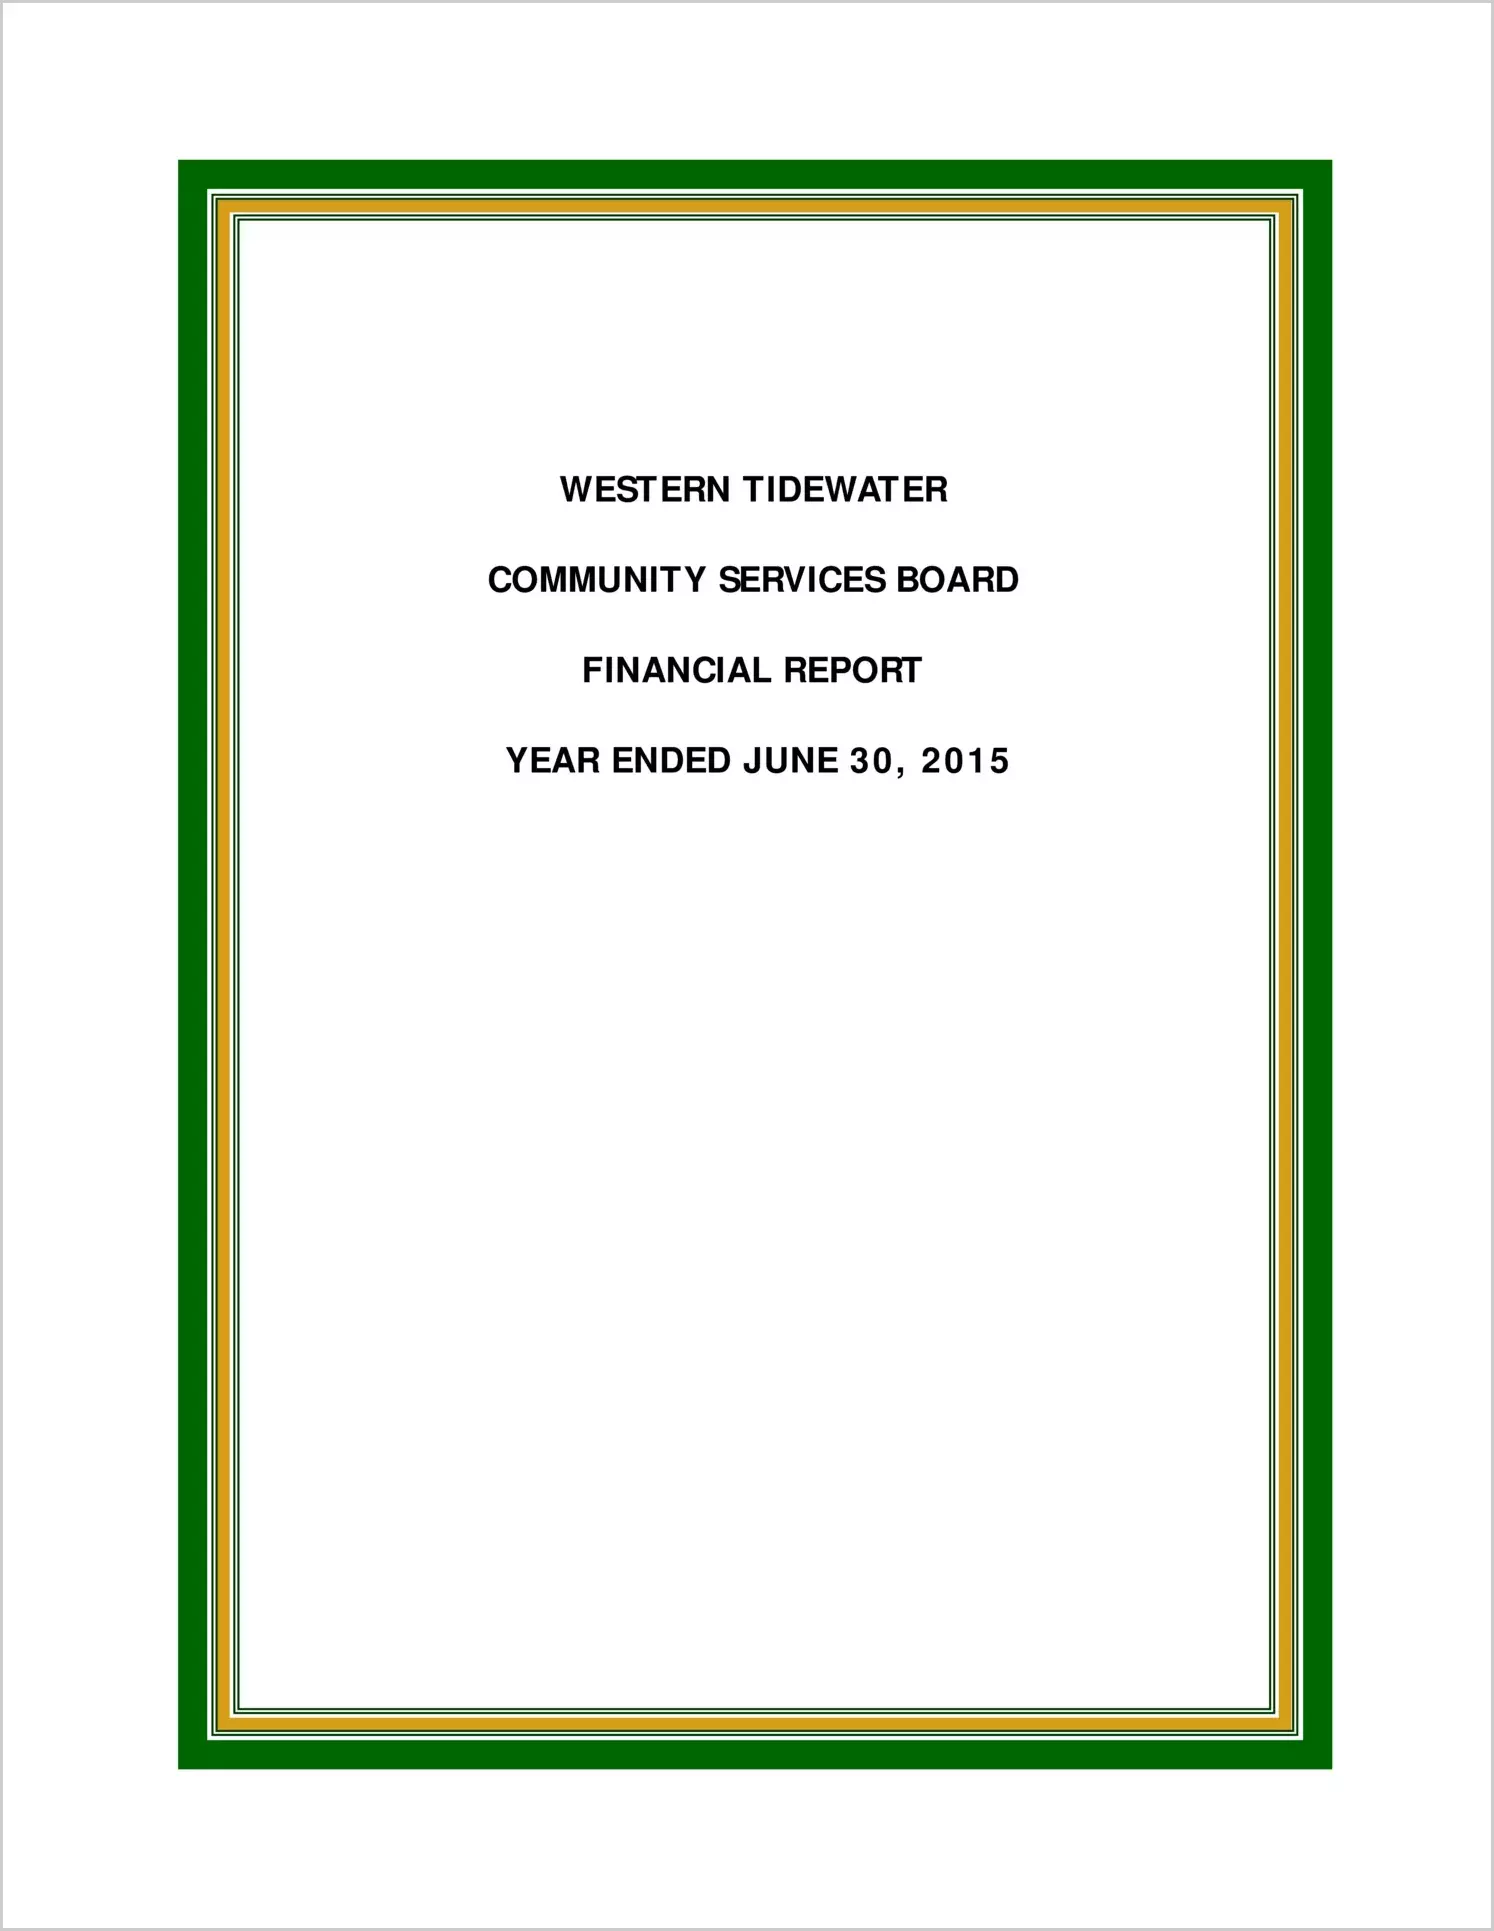 2015 ABC/Other Annual Financial Report  for Western Tidewater Community Services Board